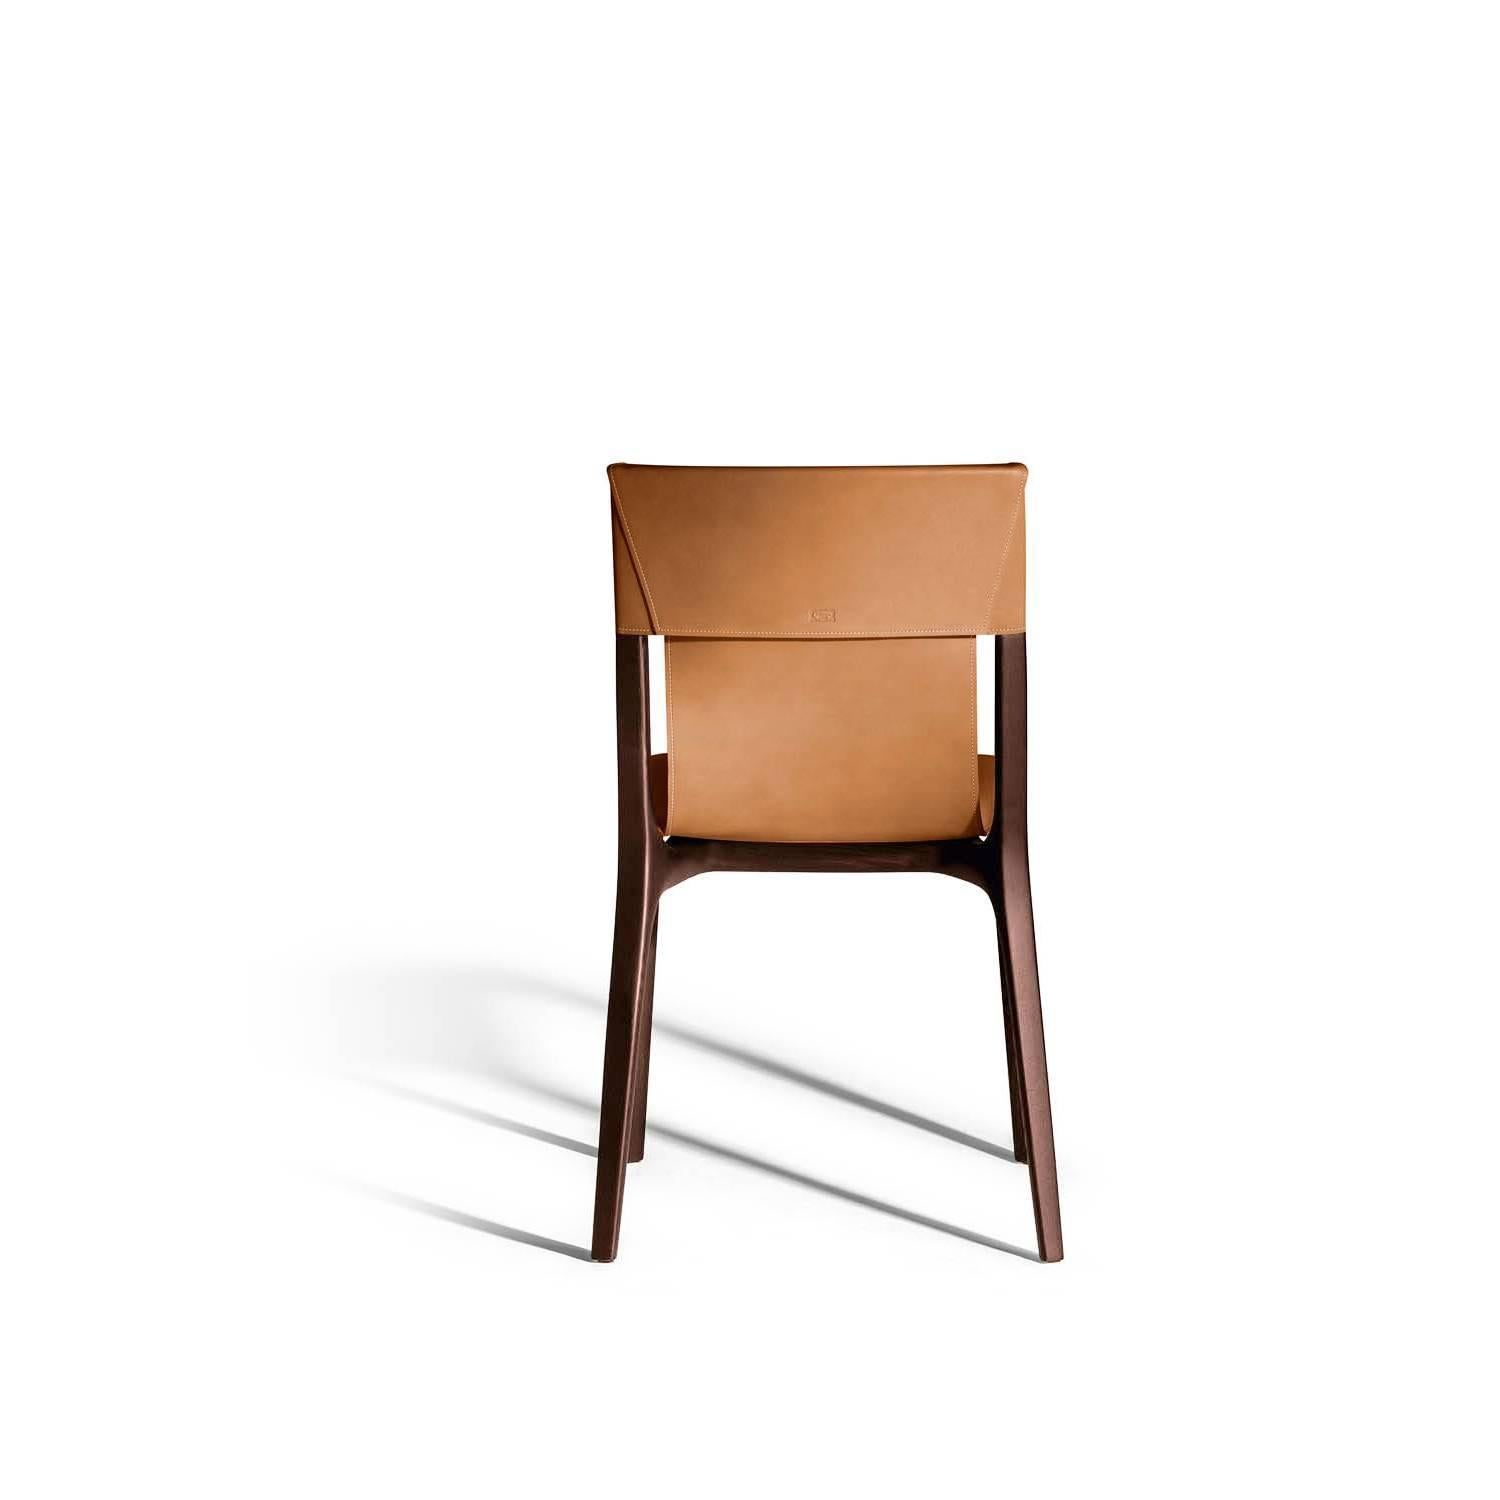 Italian Isadora Chair Cammello Saddle Extra leather Light Brown moka finishes legs For Sale